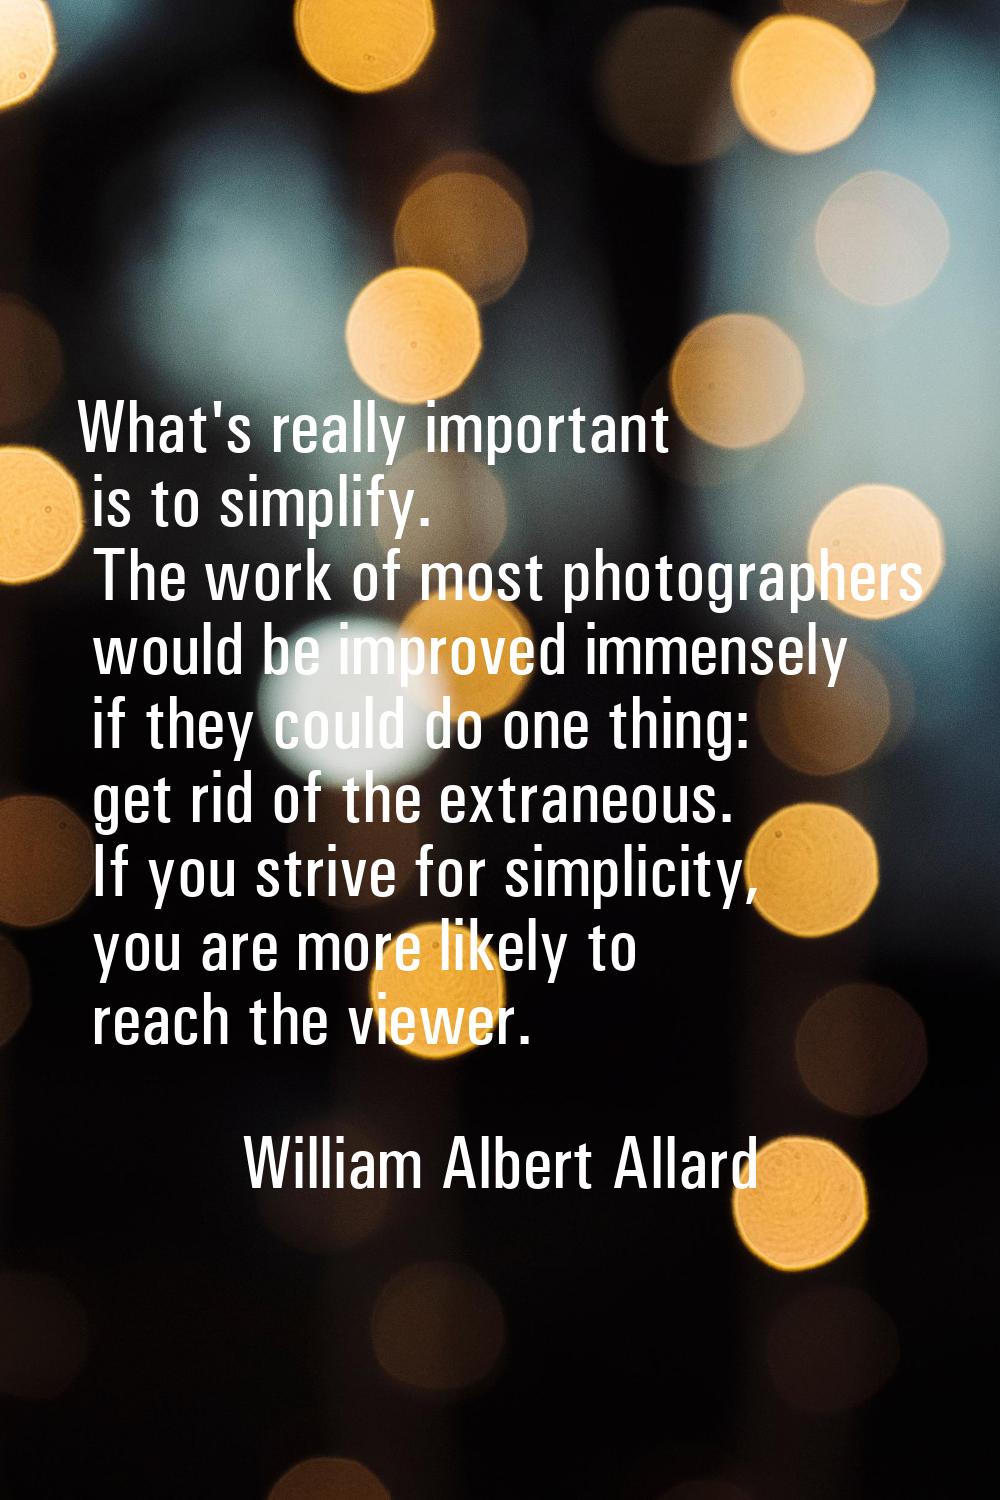 What's really important is to simplify. The work of most photographers would be improved immensely 